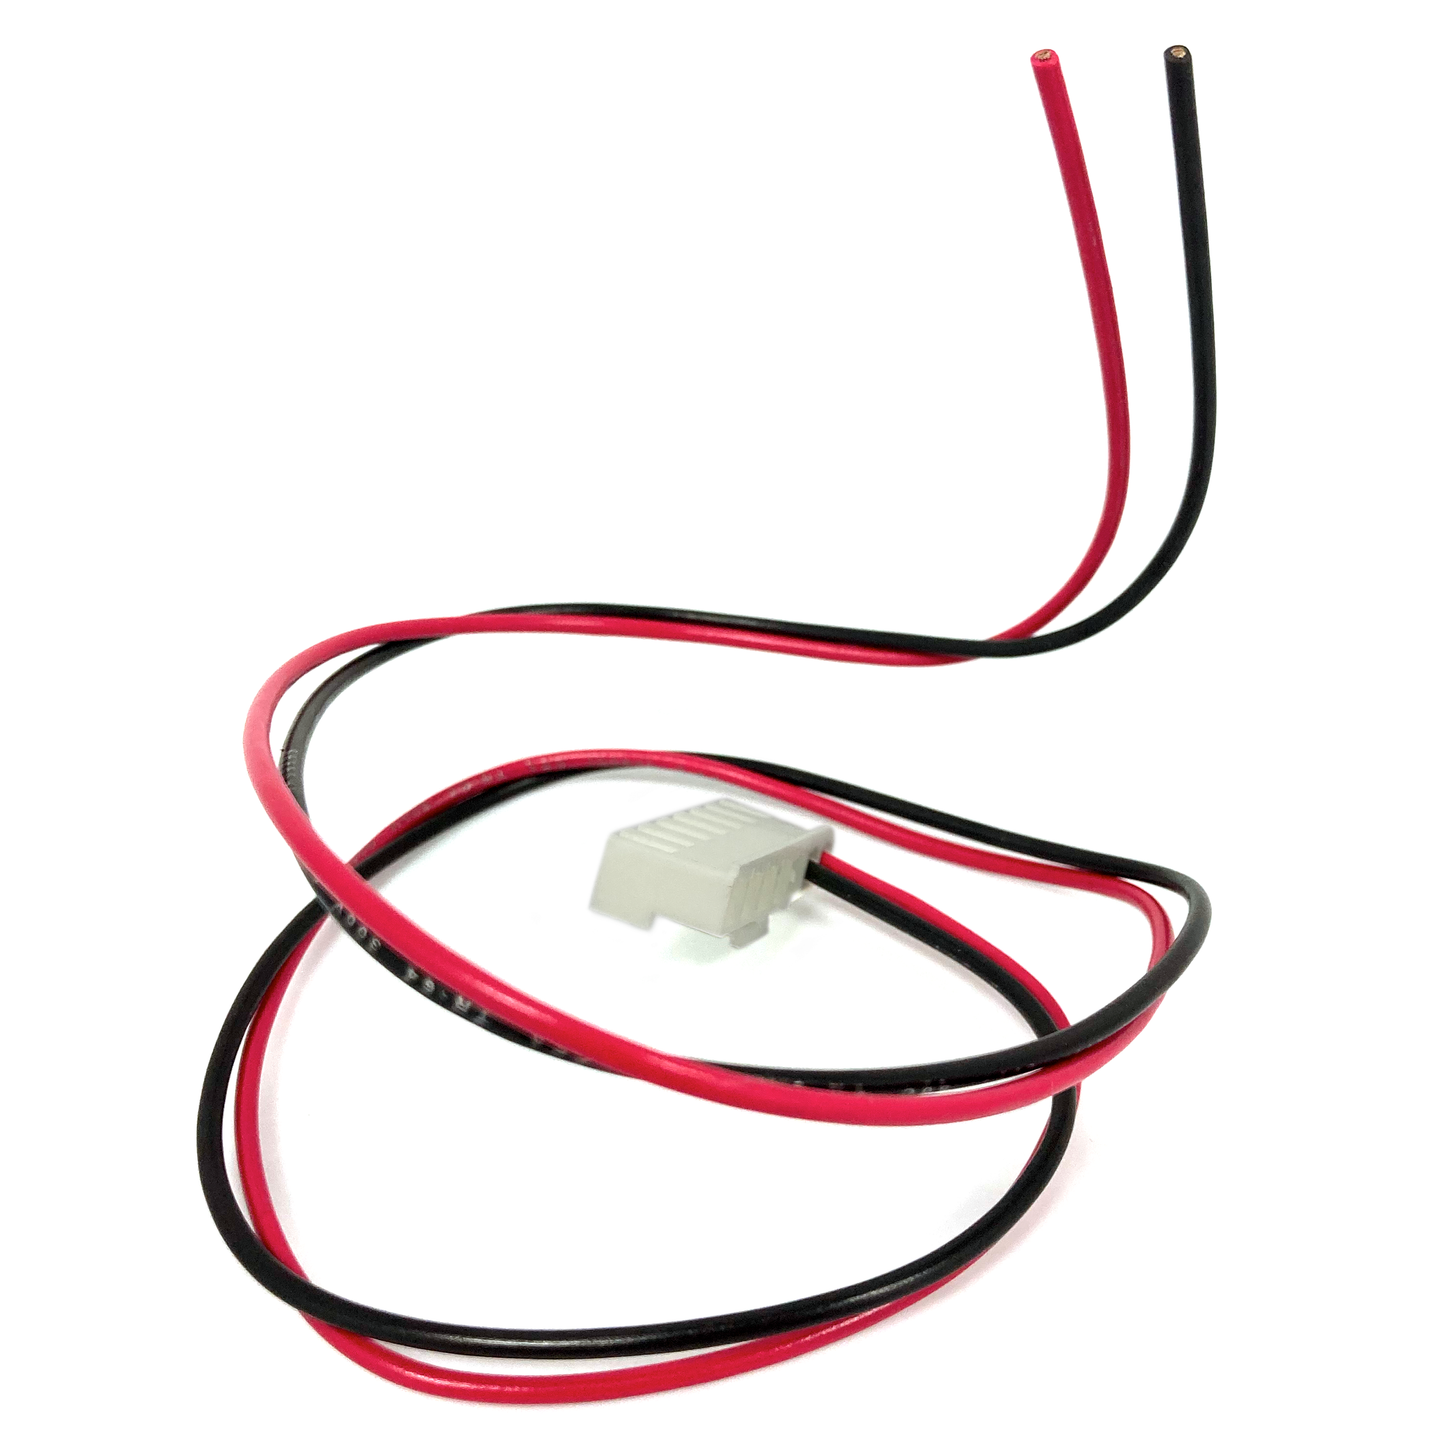 Upgrade your custom printer to a Phoenix printer by splicing the Pyramid Printer Power Cable from the custom power line to supply power to your new Phoenix Printer. Sold by Miele Manufacturing.